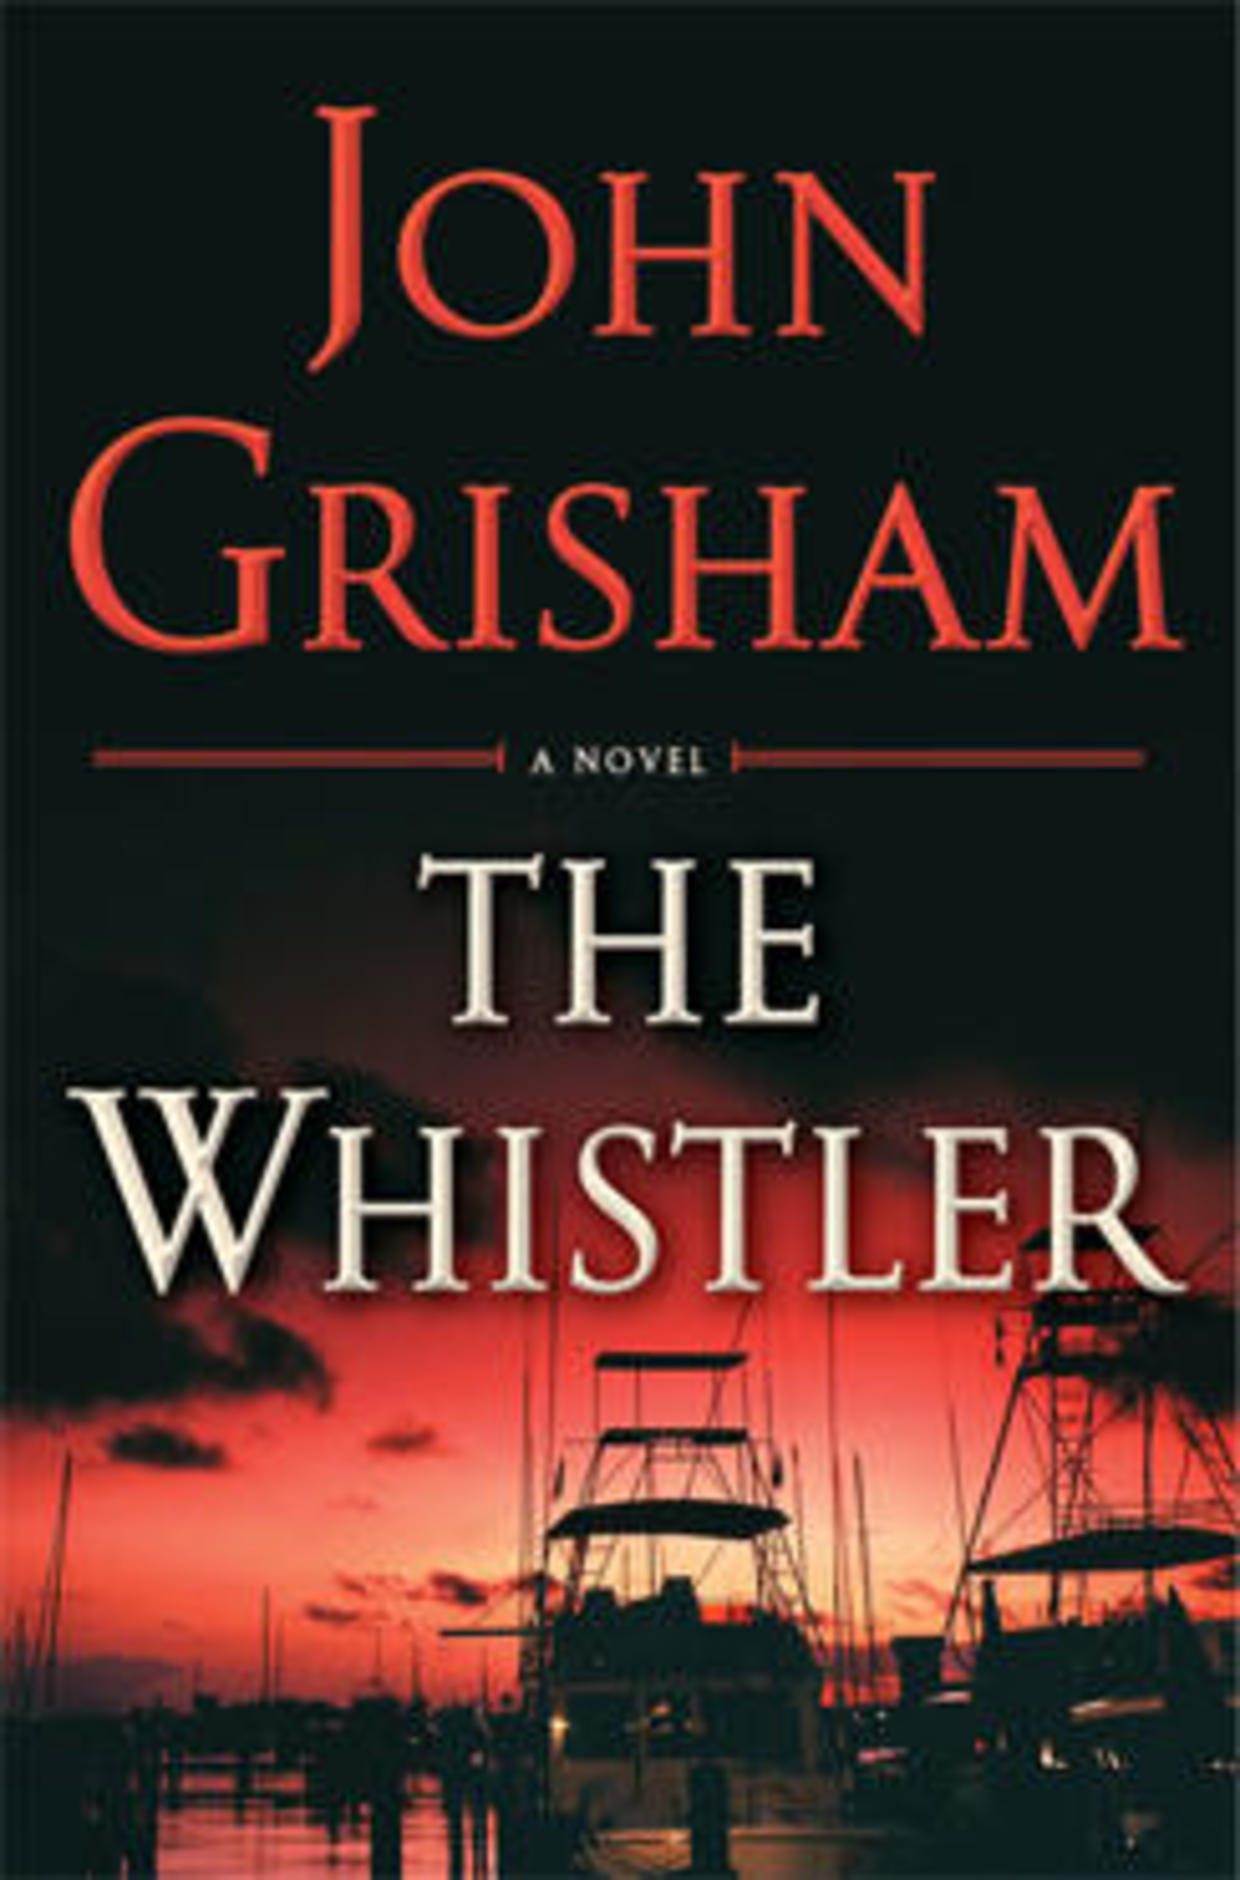 John Grisham, looking for a place to hide CBS News